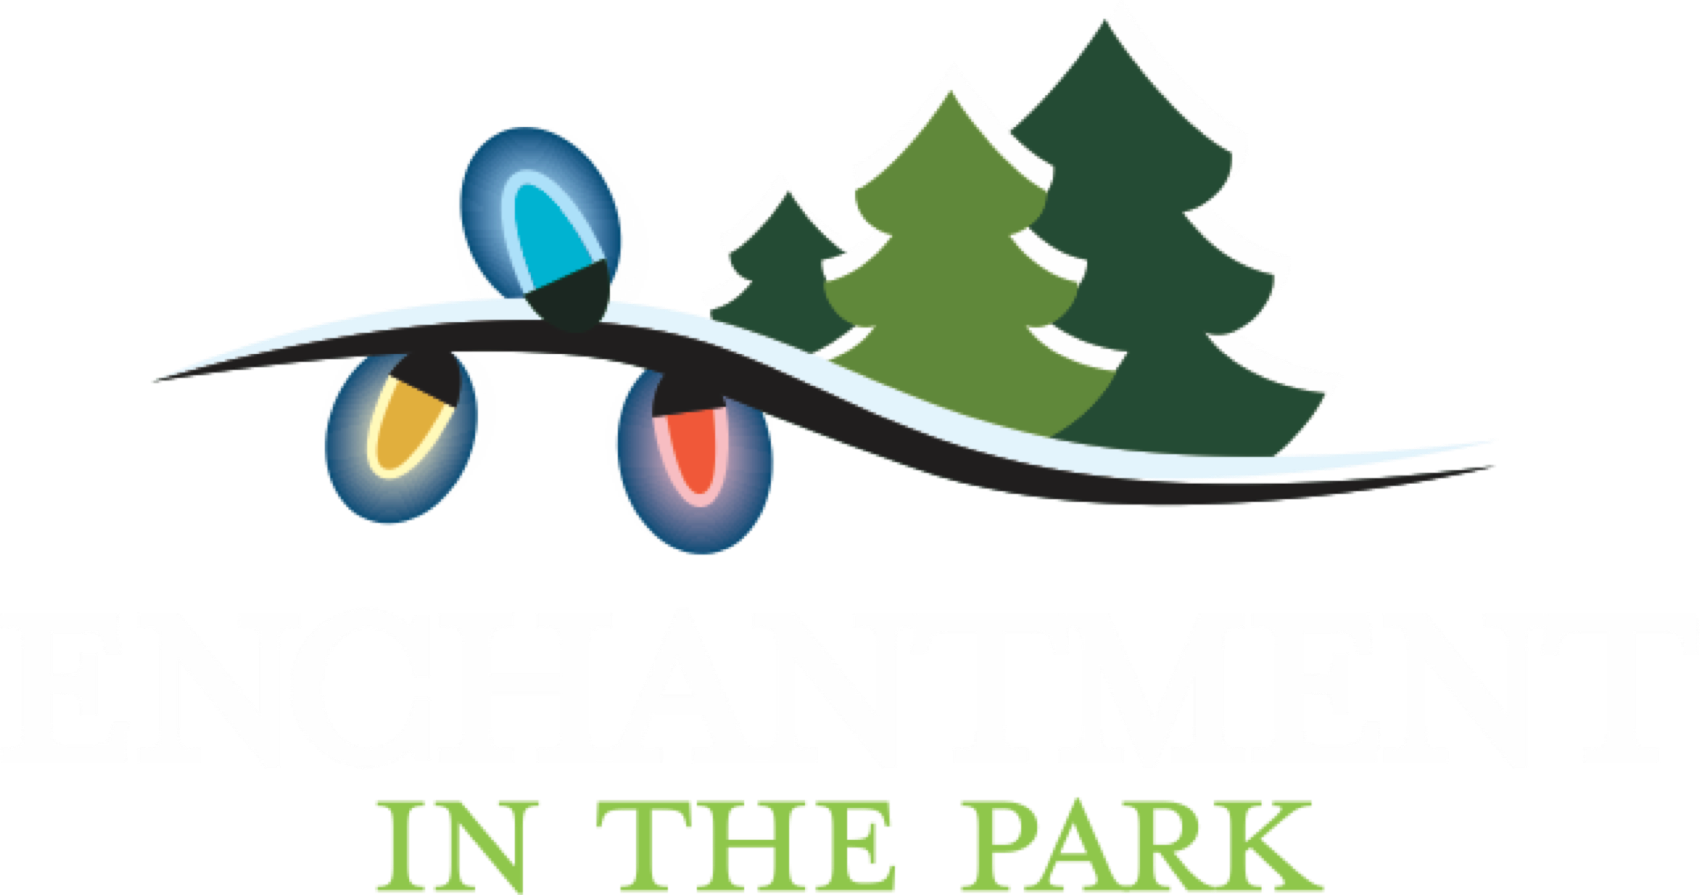 Enchantment in the Park Logo